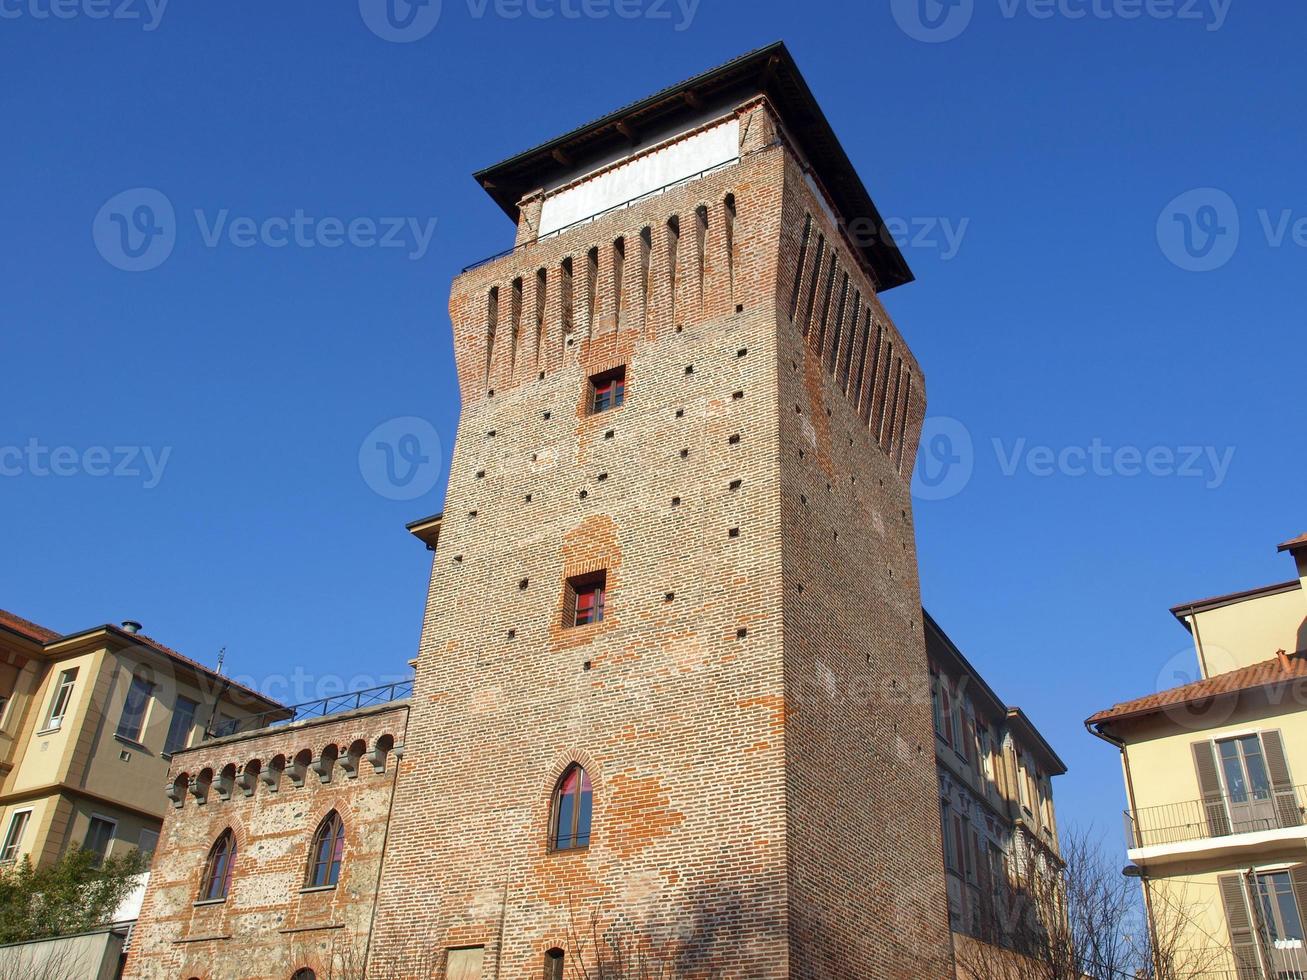 Tower of Settimo photo